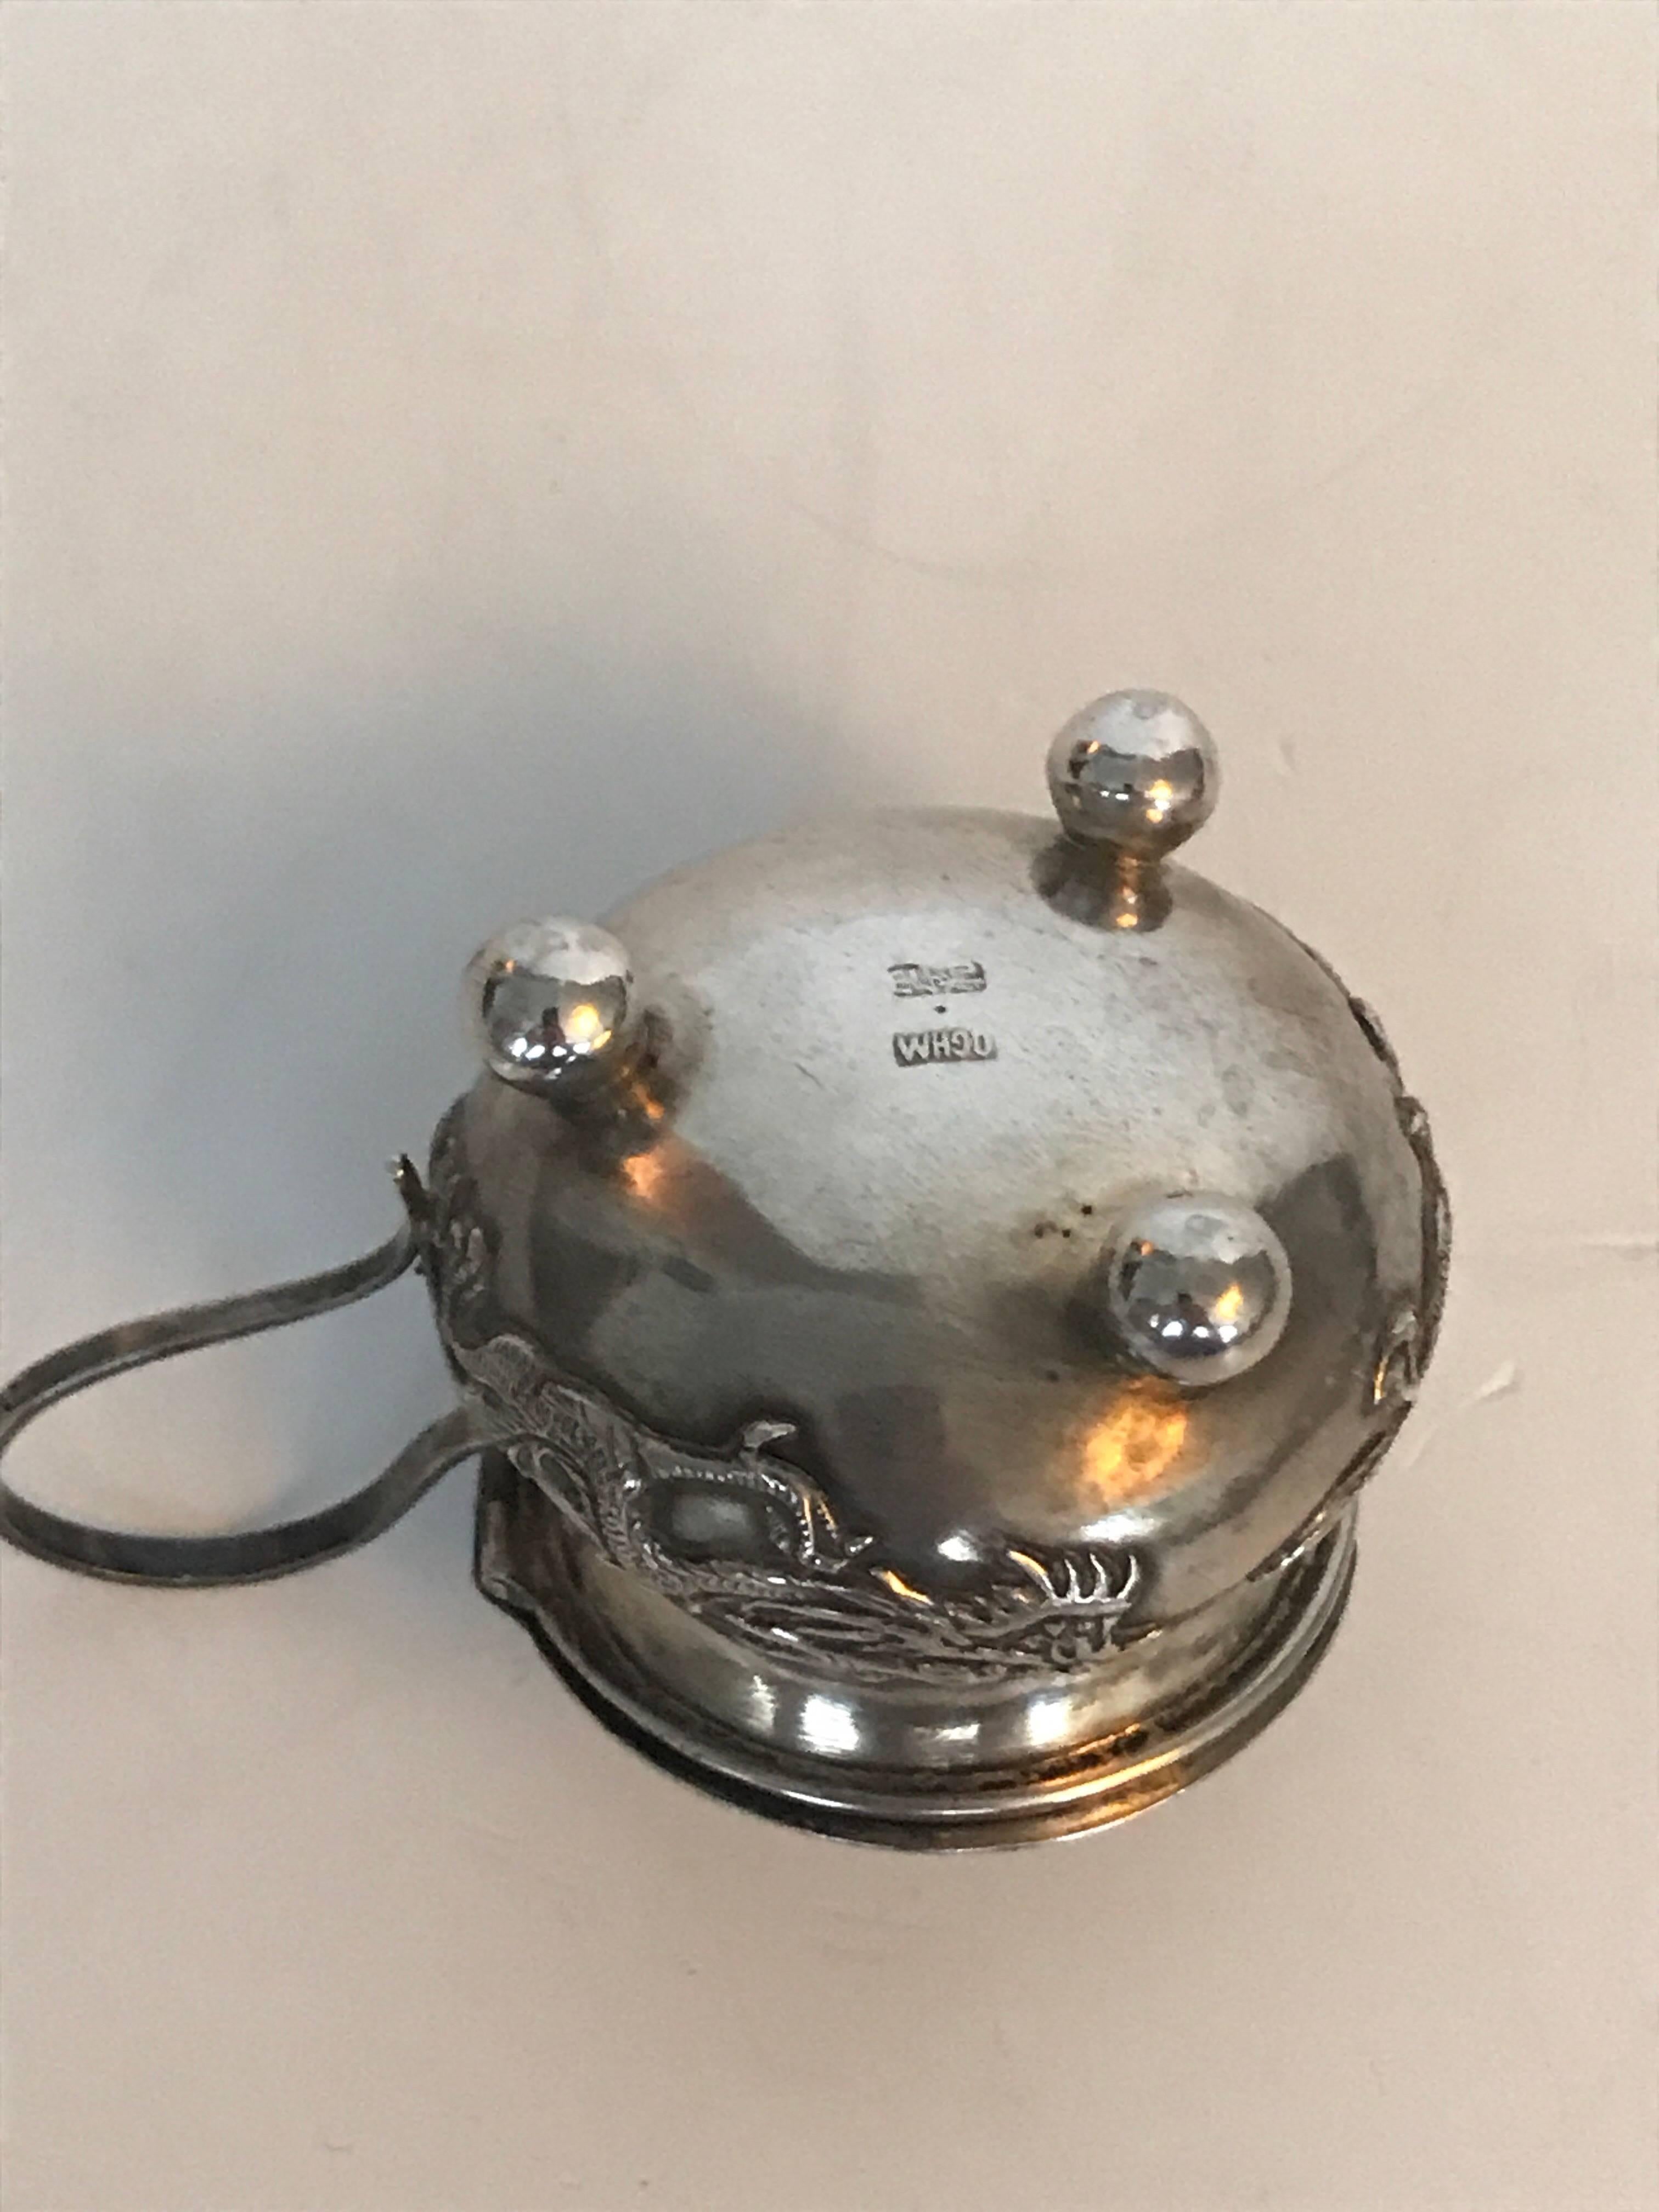 Wang Hing Chinese Export Silver Dragon Mustard Pot with Spoon Early 20th Century For Sale 1